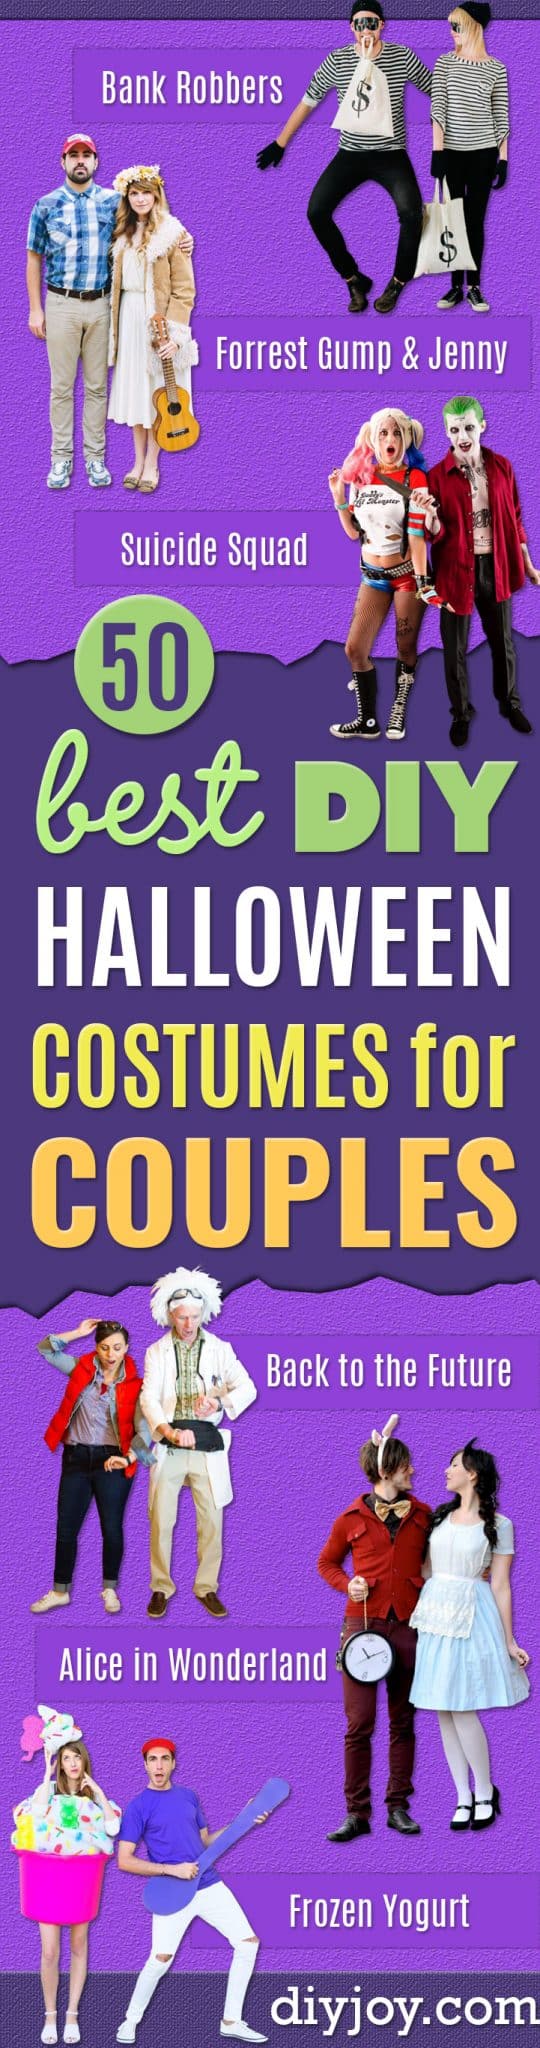 50 DIY Halloween Costumes for Couples